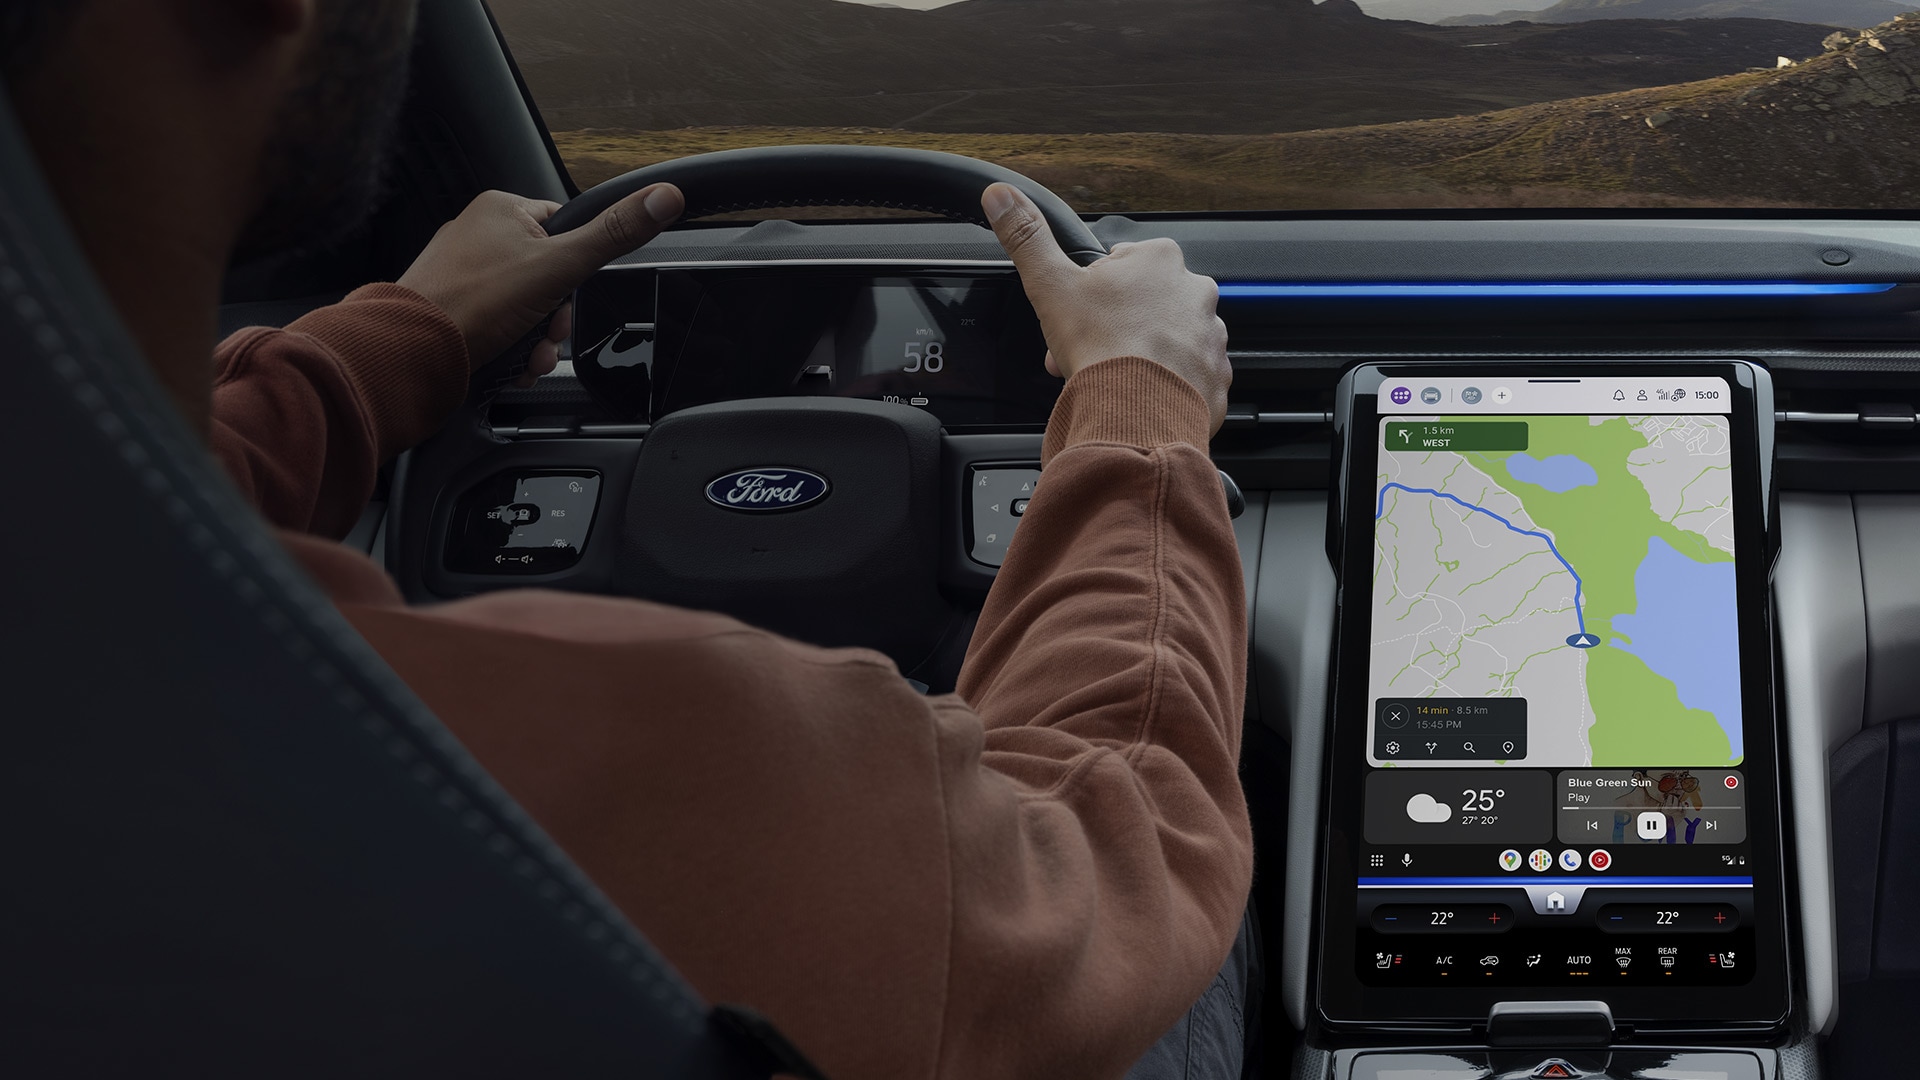 New All-Electric Ford Explorer interior with touchscreen